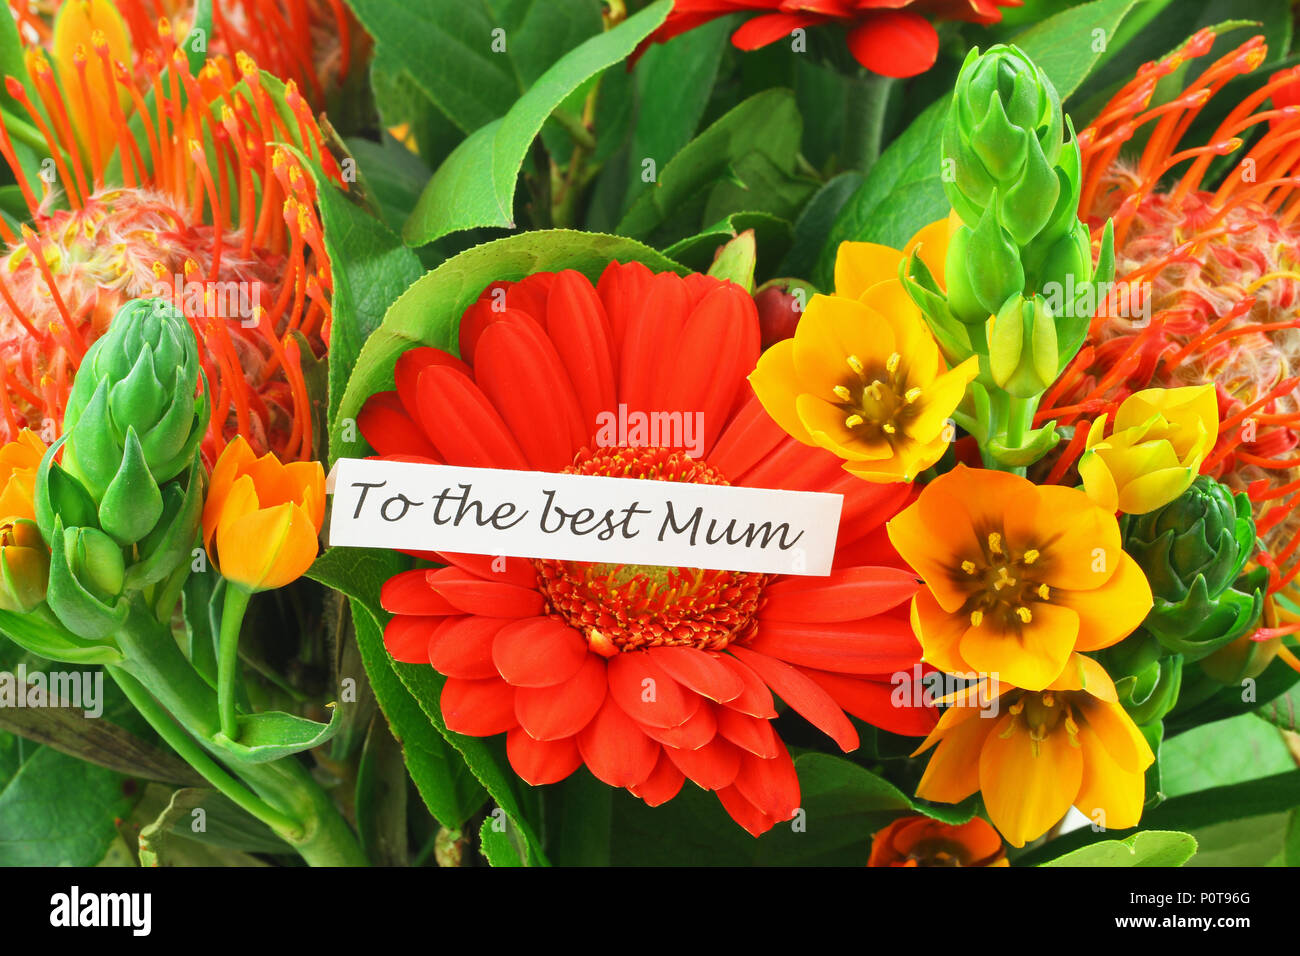 To the best Mum card with background of colorful flowers Stock Photo